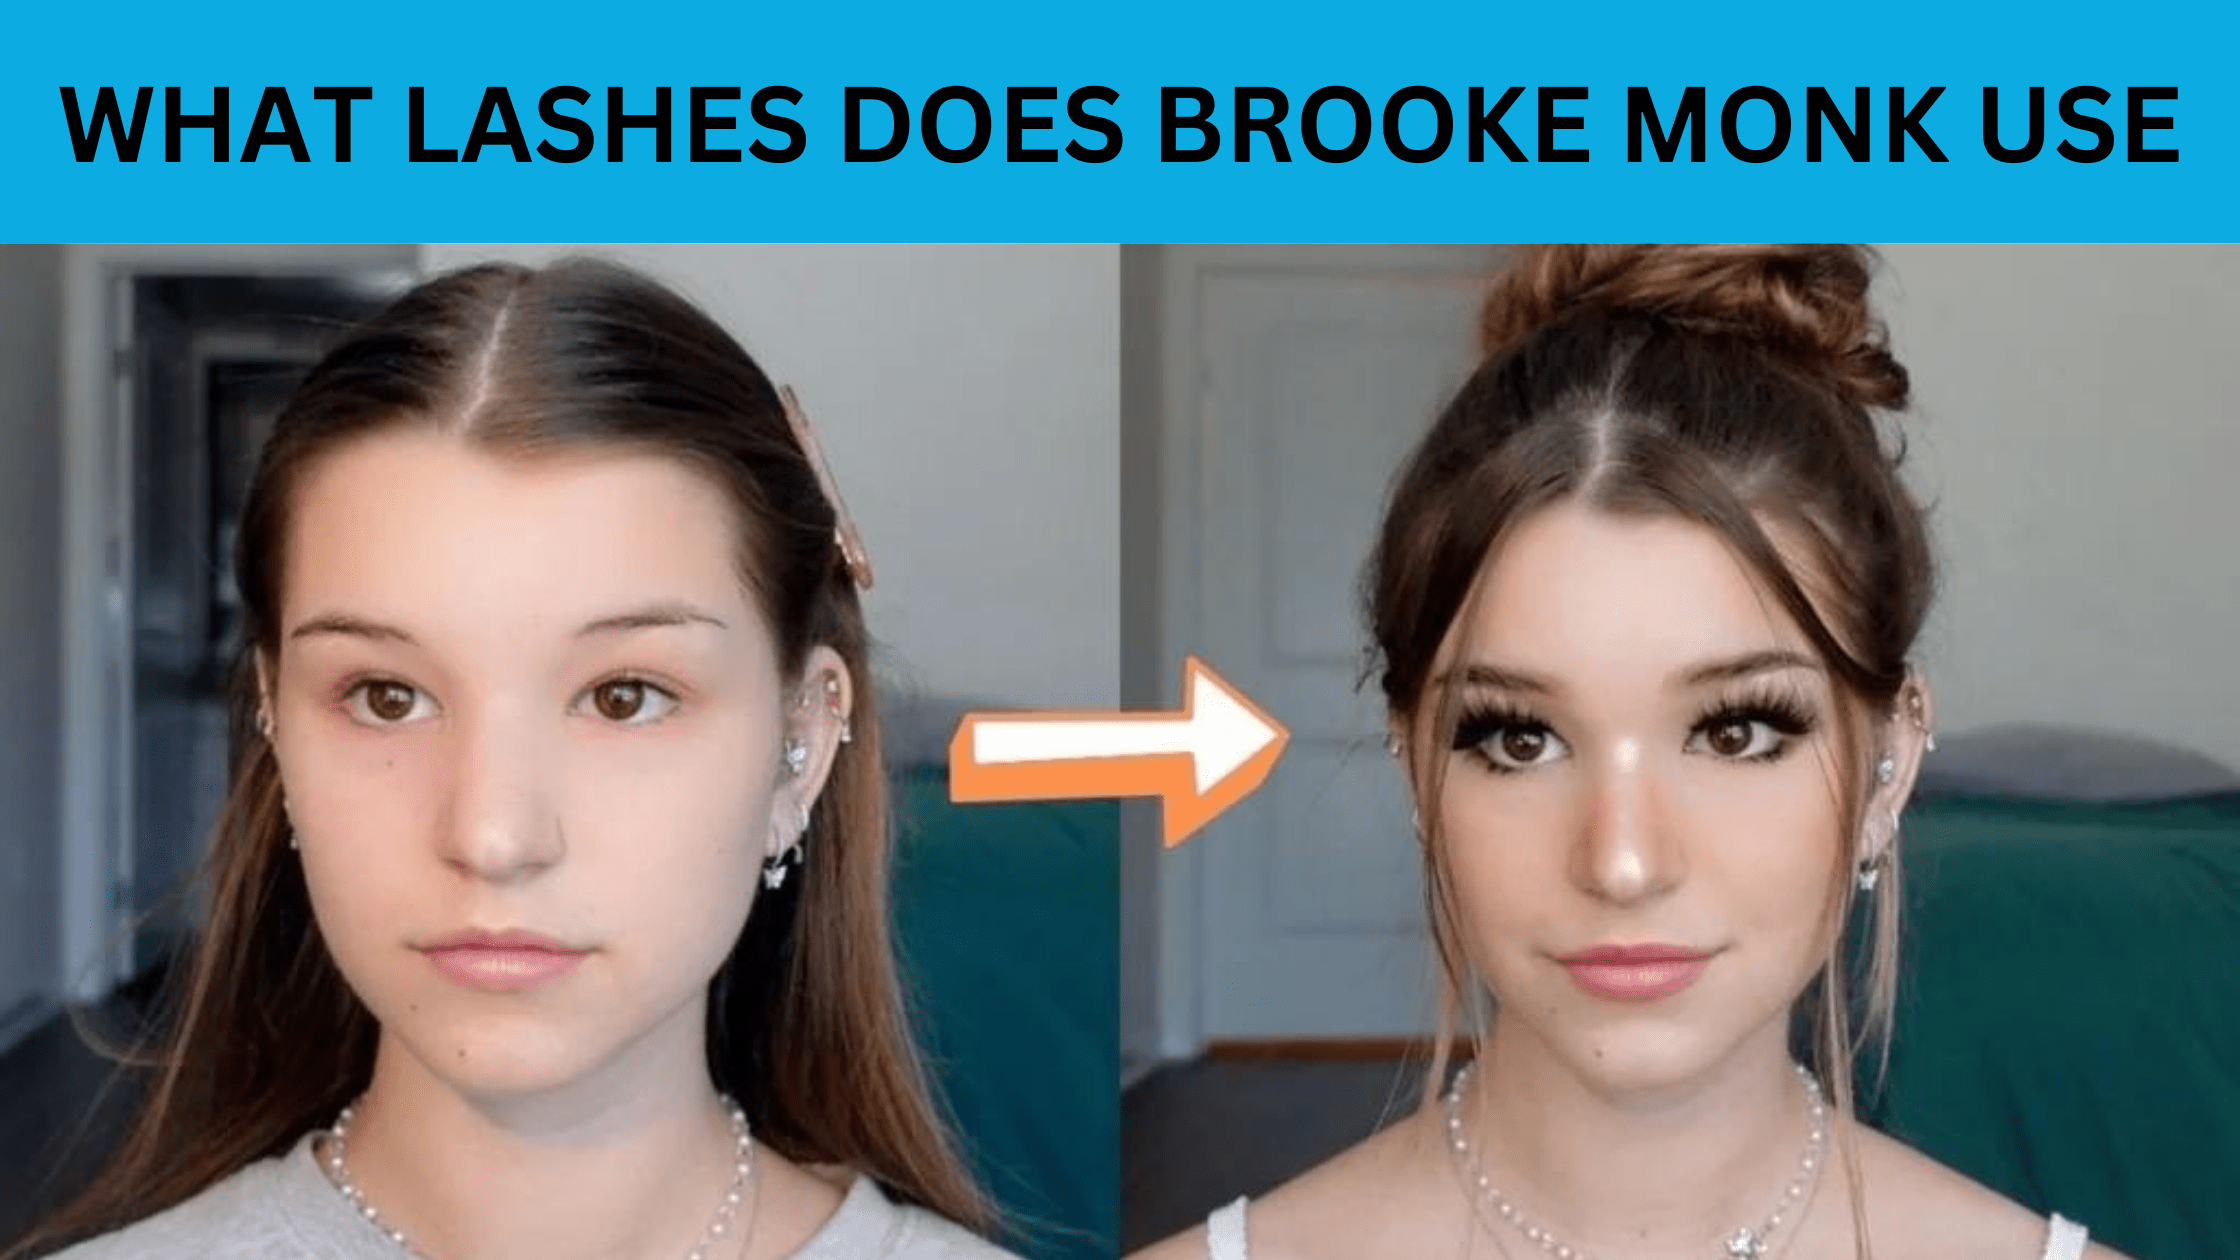 What Lashes Does Brooke Monk Use